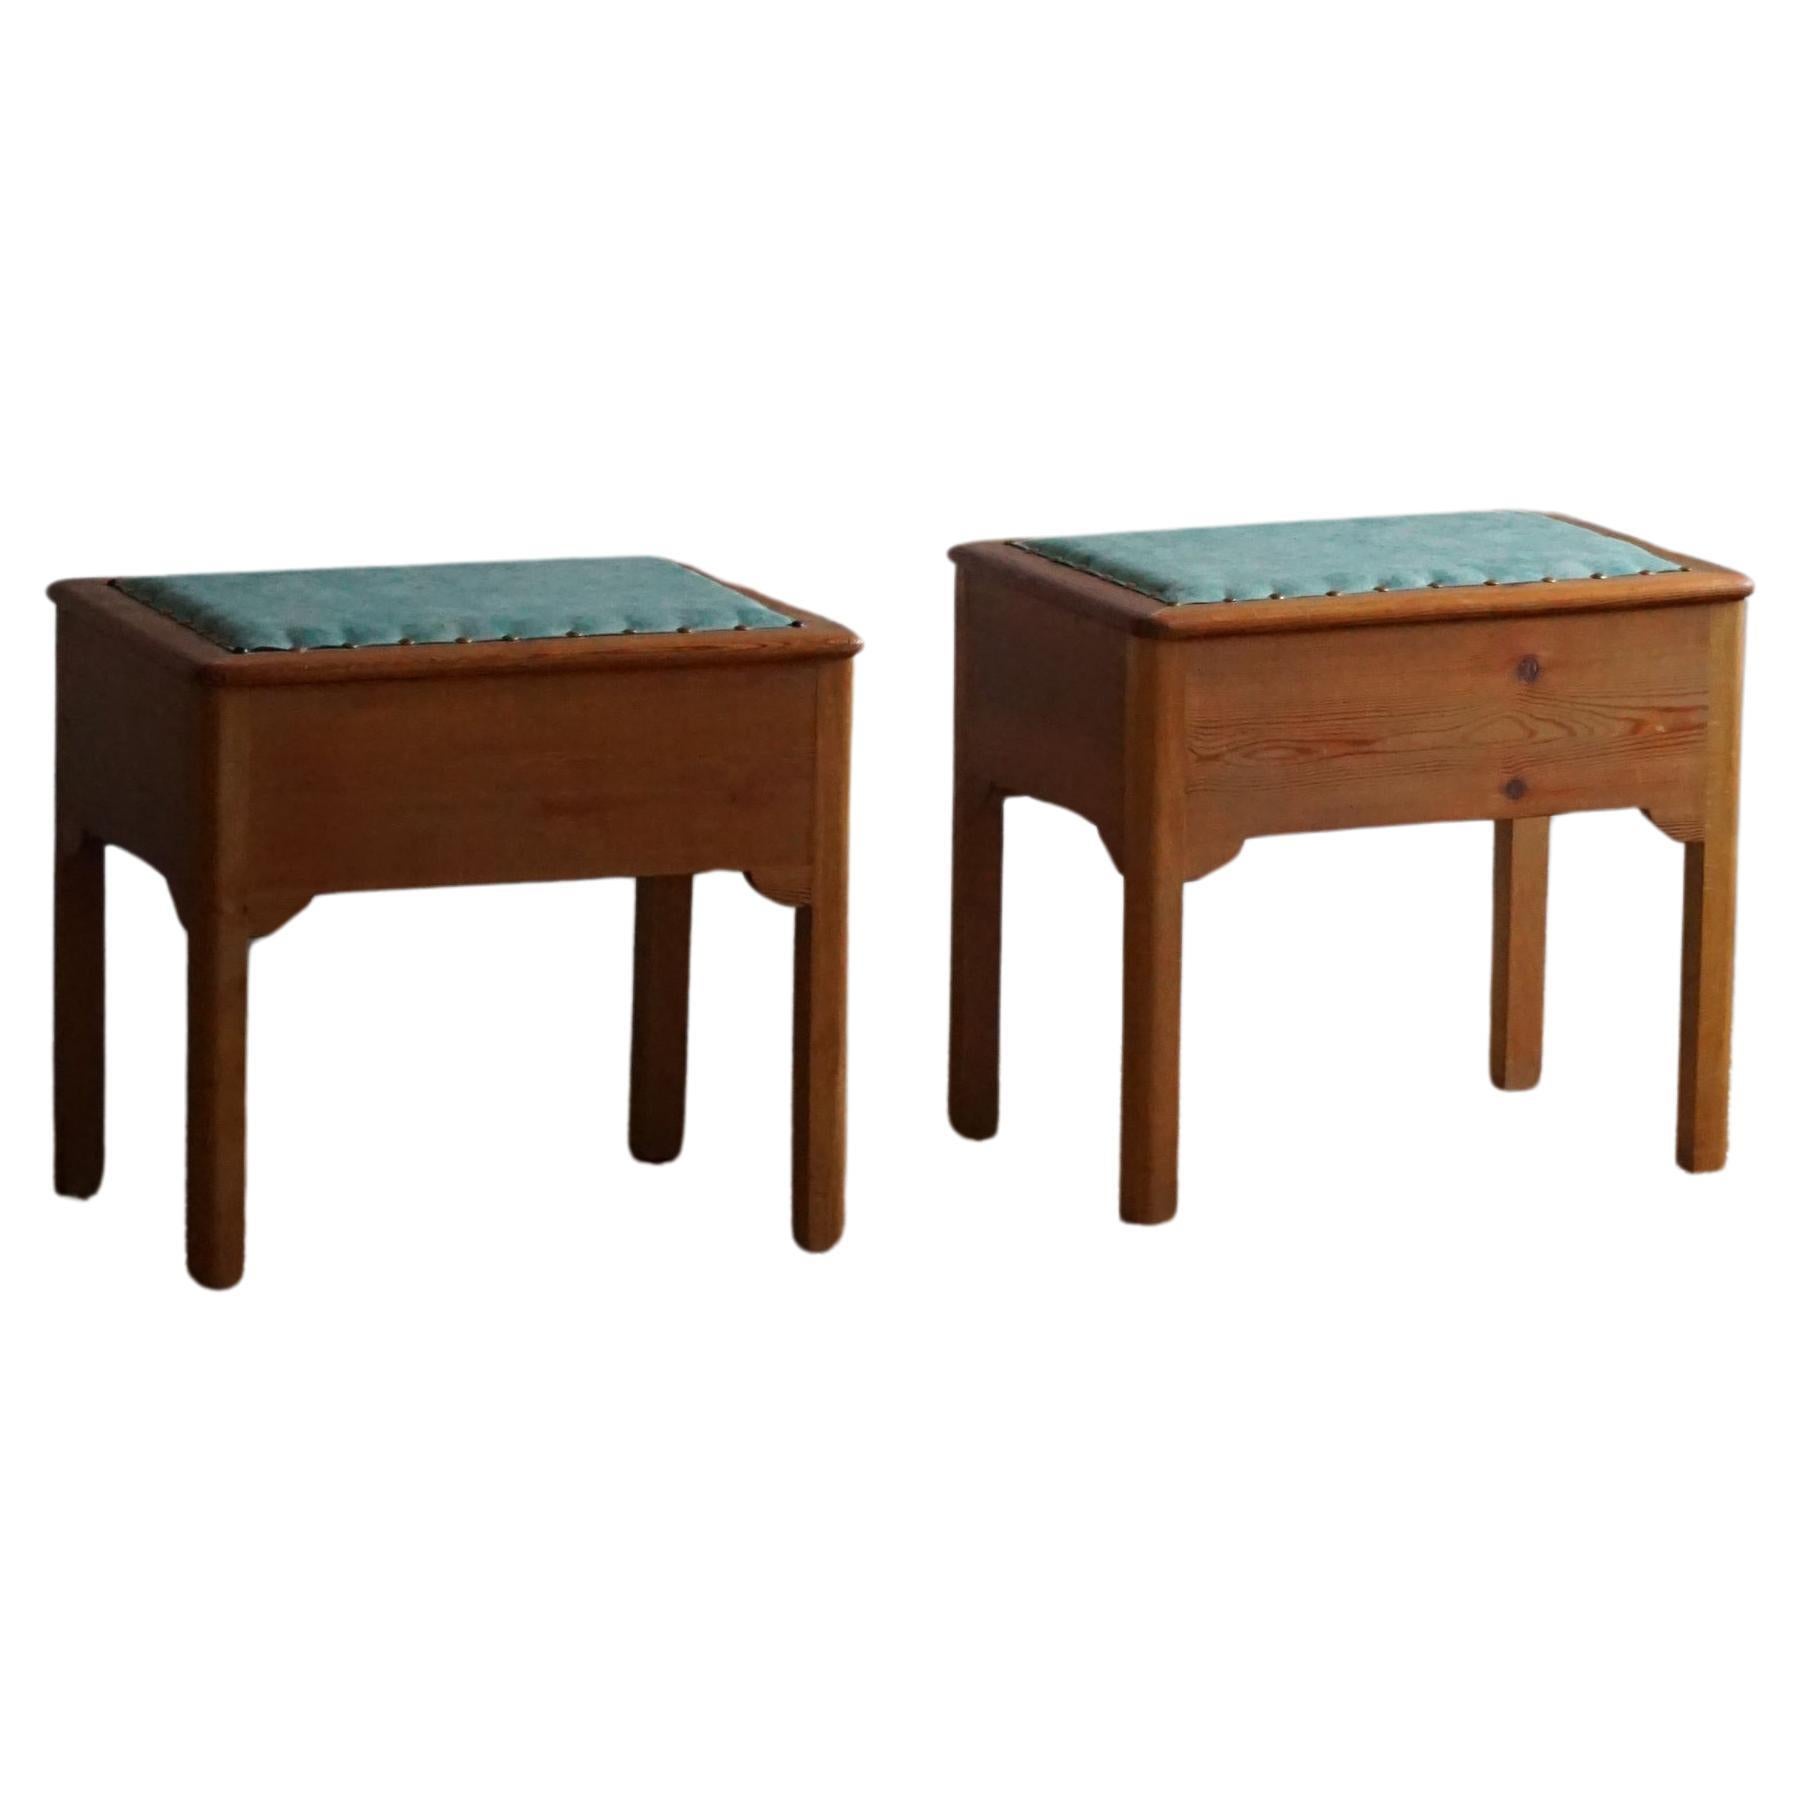 A Pair of Stools in Pine & Fabric with Storage, By a Swedish Cabinetmaker, 1950s For Sale